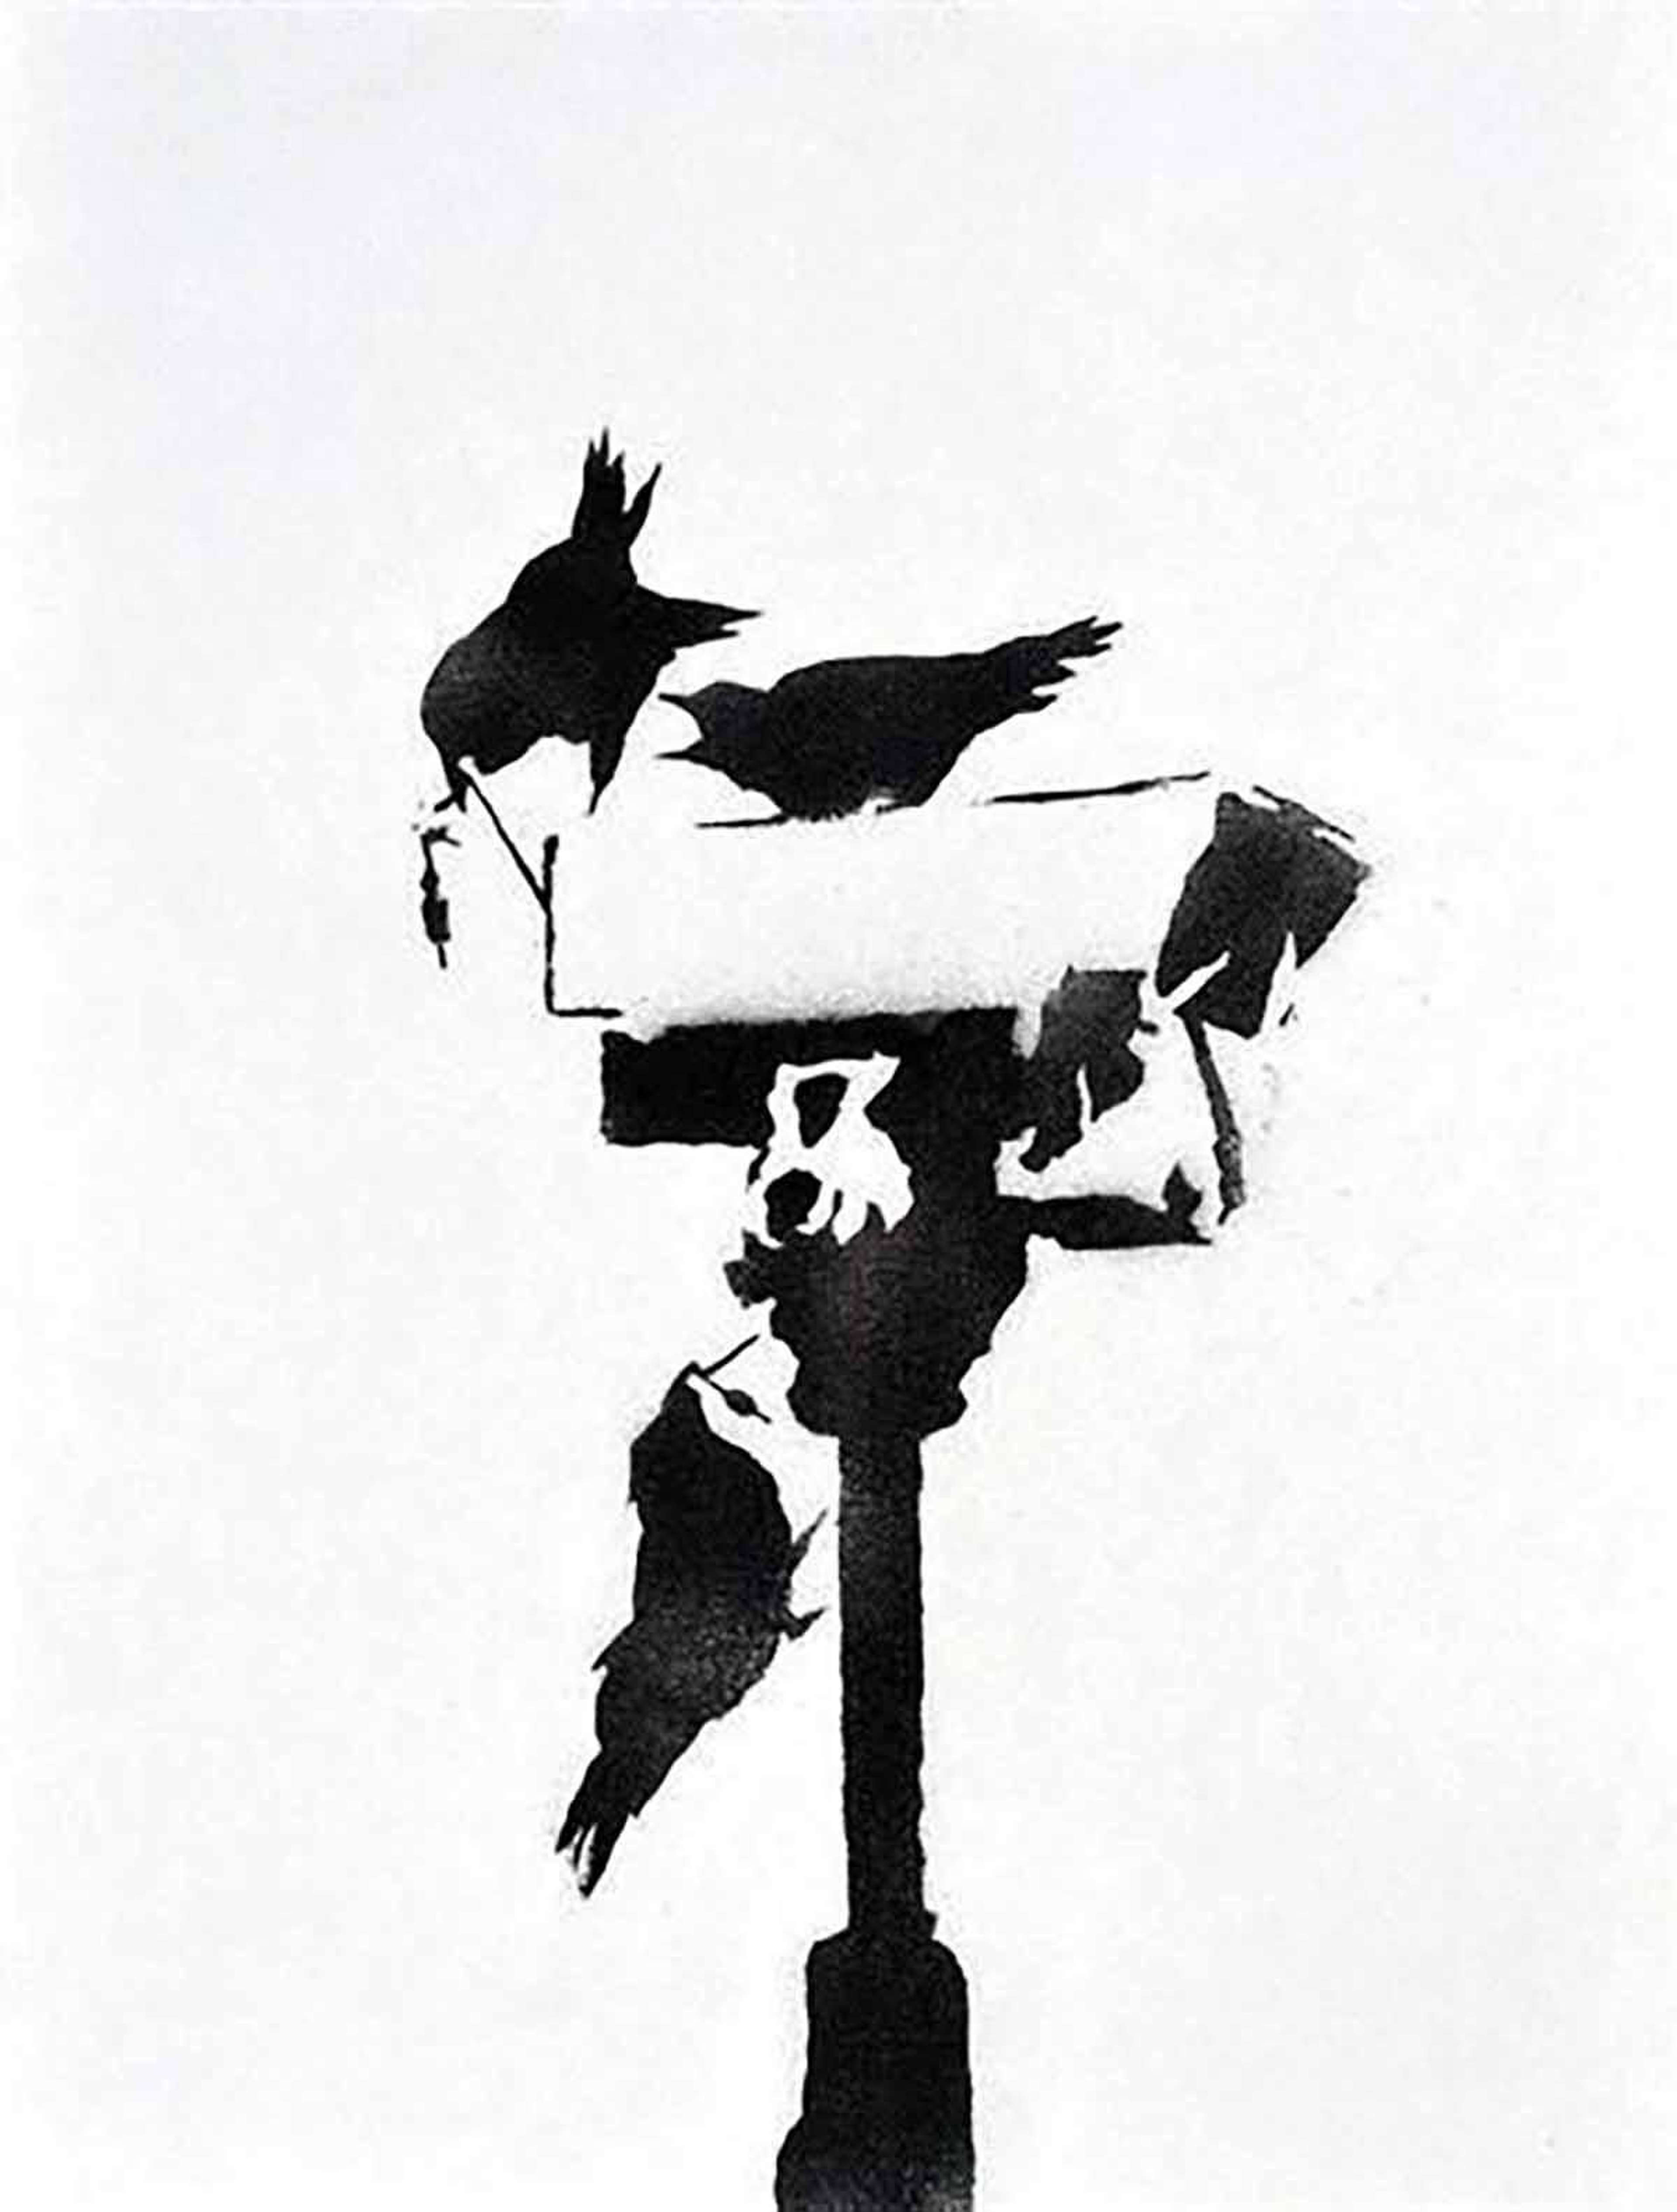 Banksy's Angry Crows